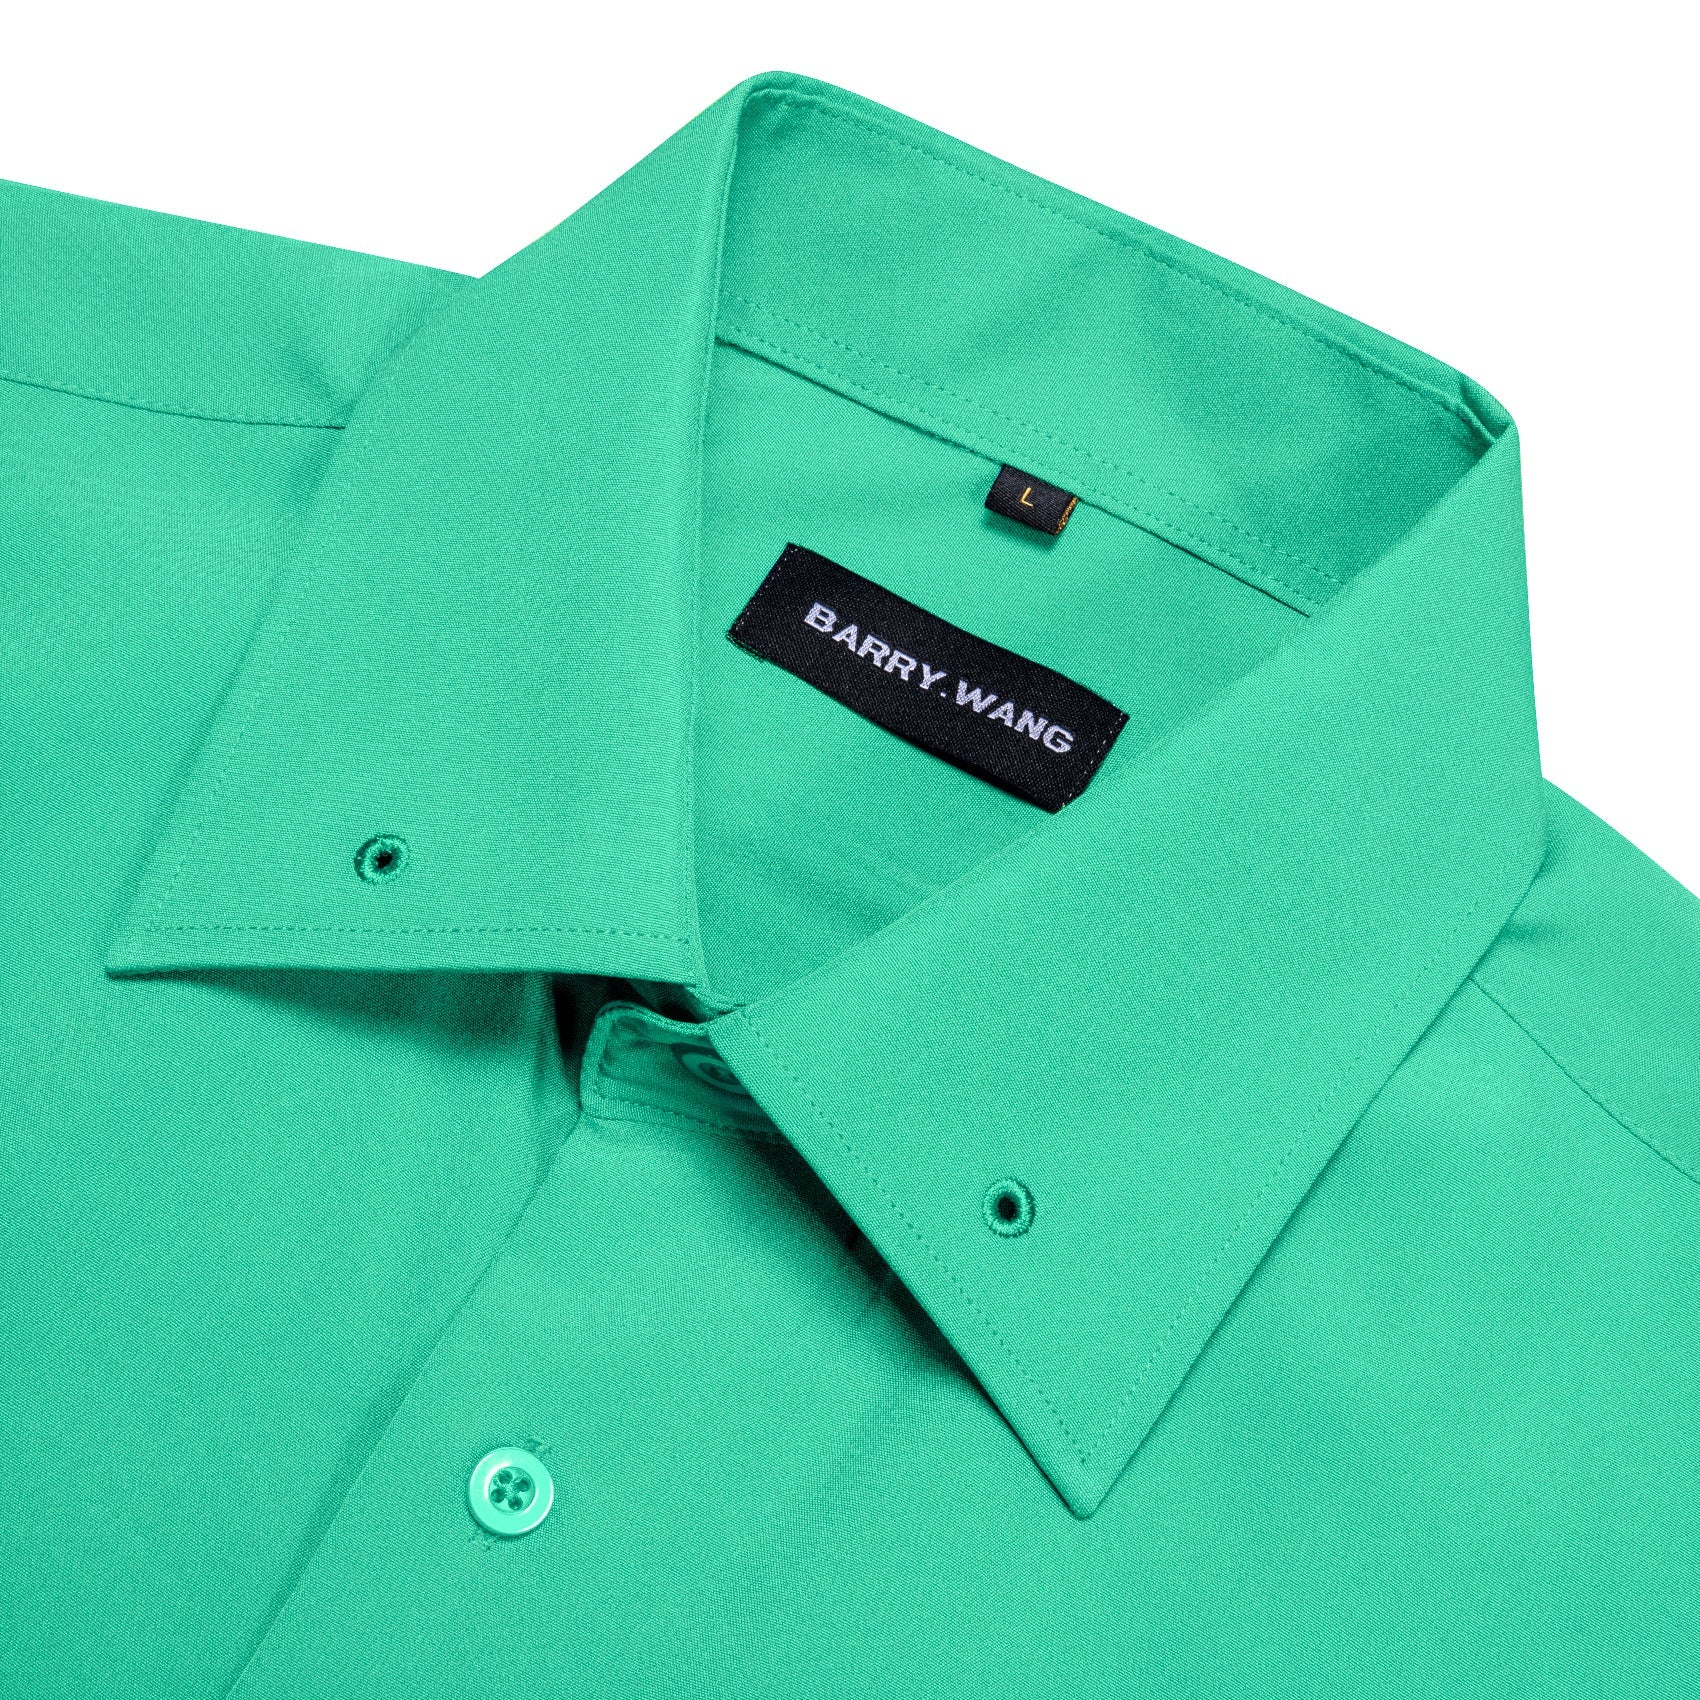 Barry.wang Pale Green Solid Silk Shirt with Collar Pin